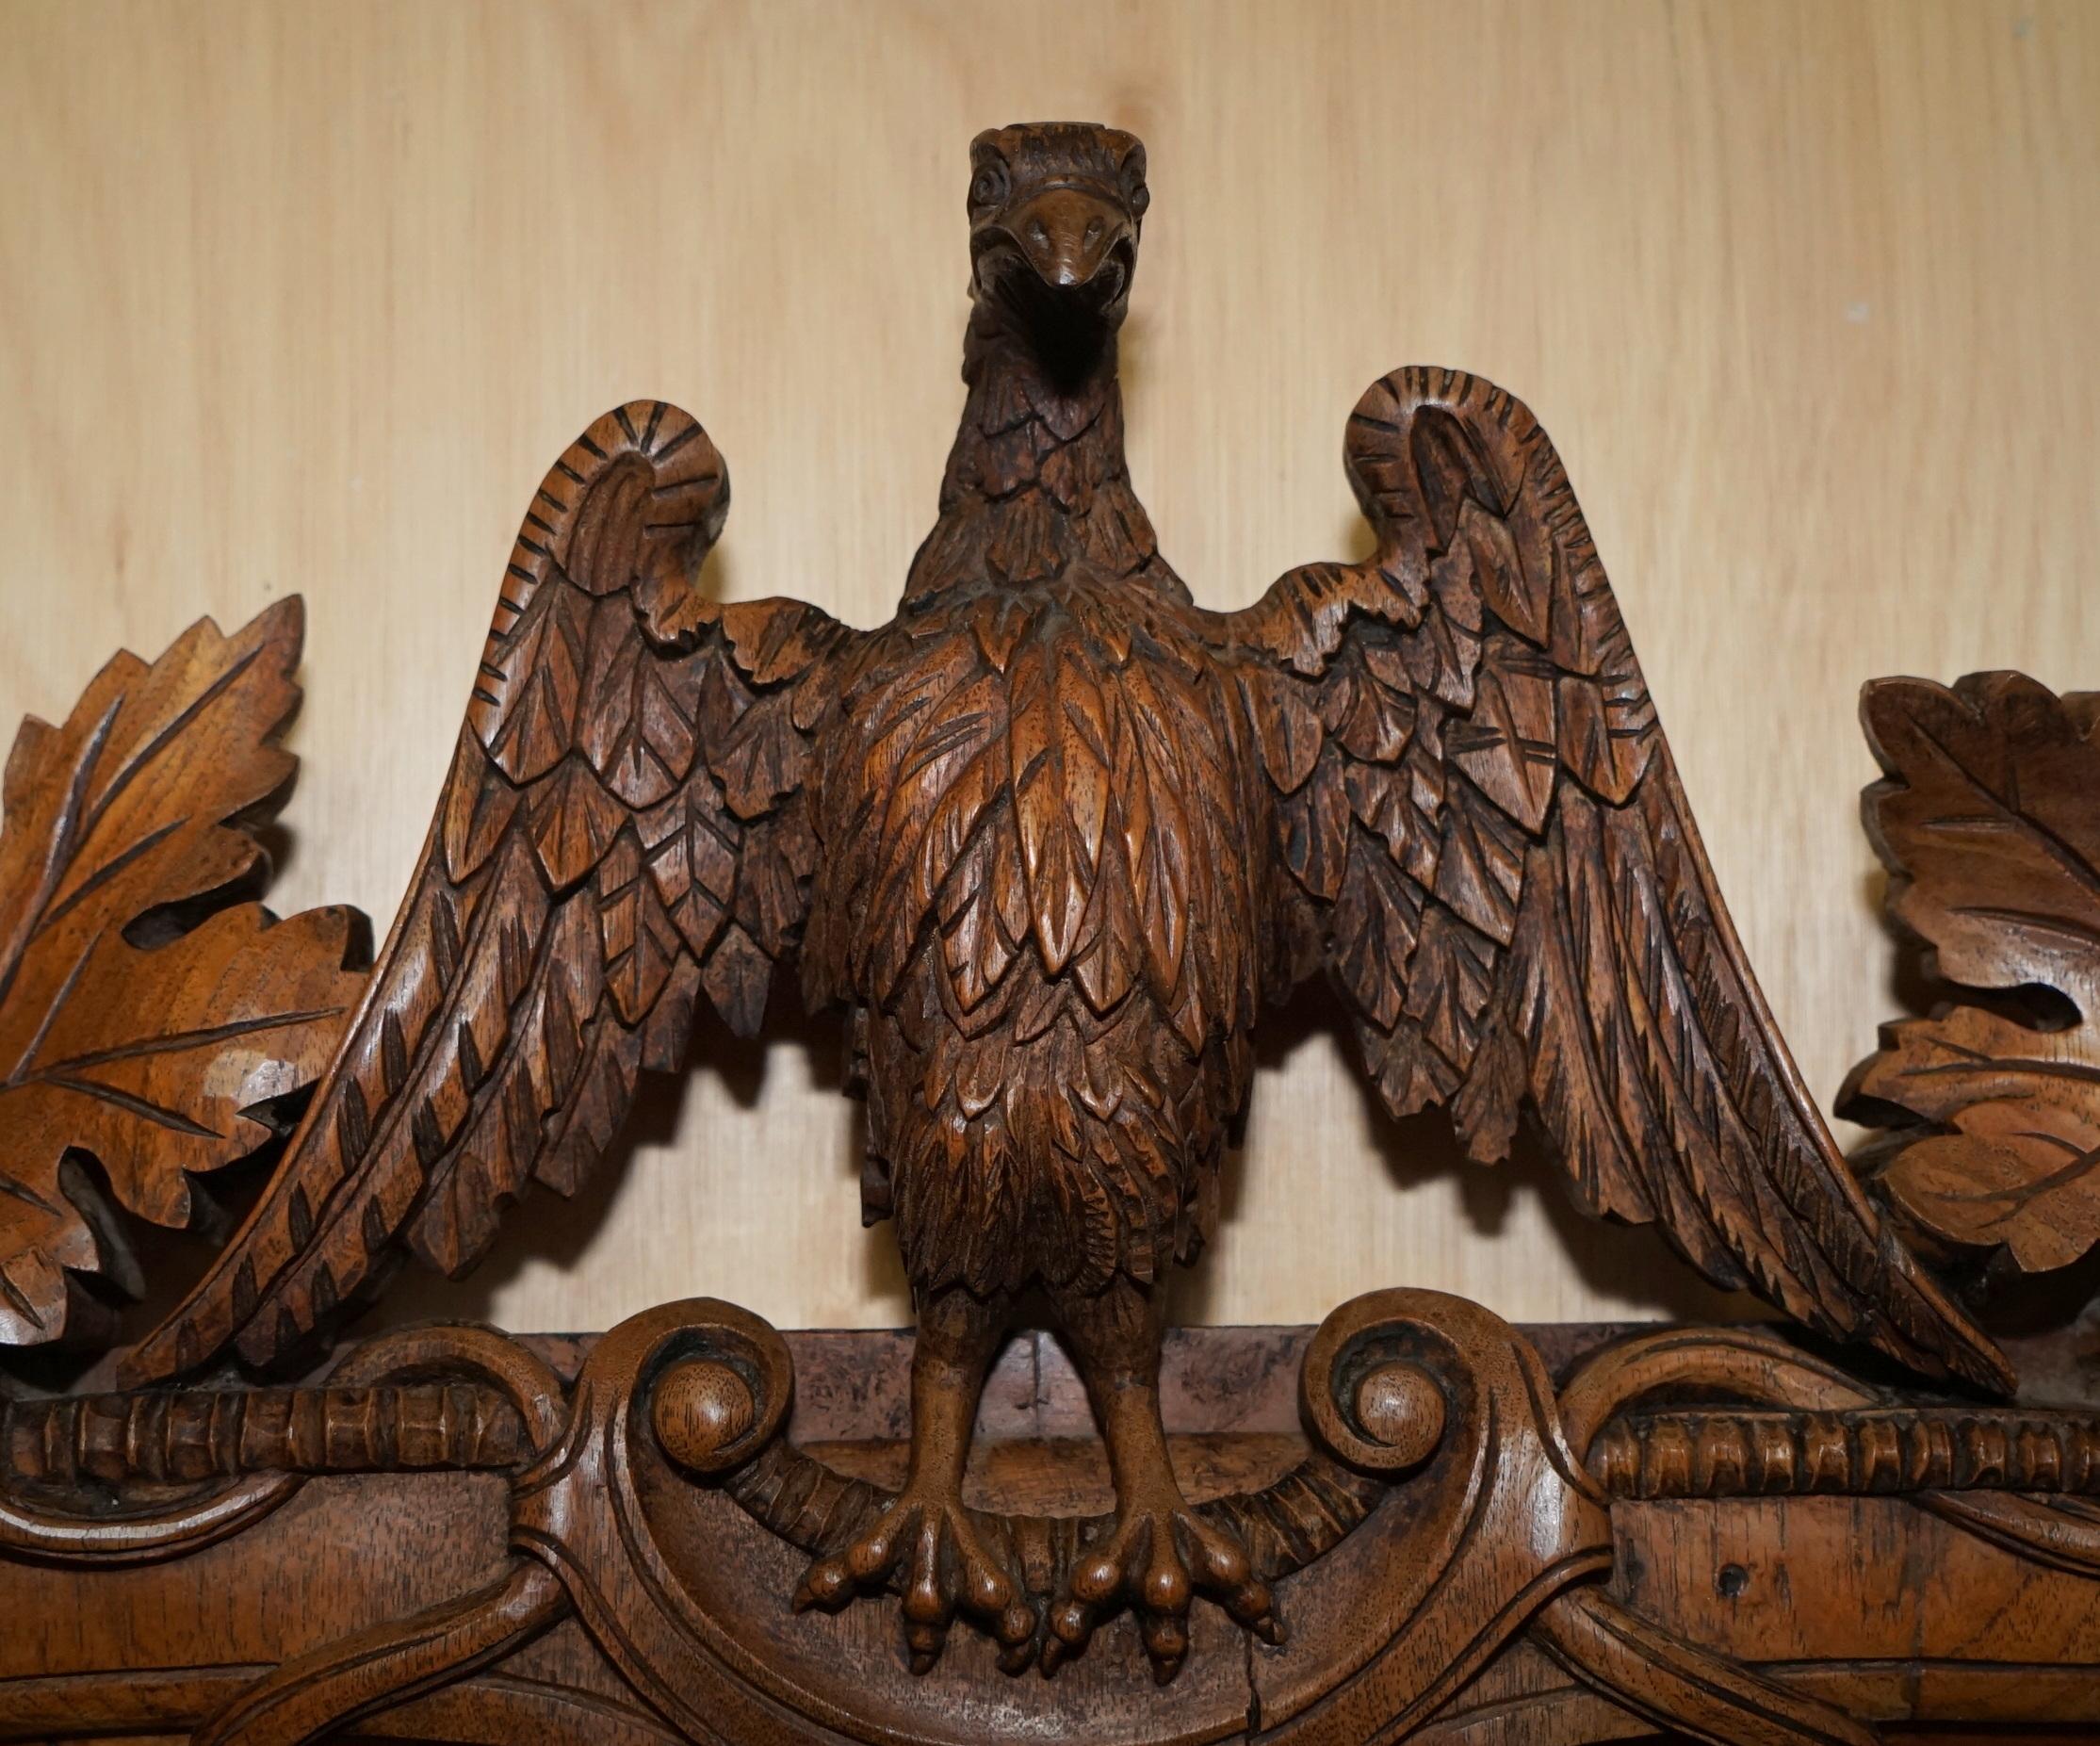 Hand-Crafted STUNNING ANTIQUE ViCTORIAN HAND CARVED CIR 1860 AMERICAN EAGLE OVERMANTLE MIRROR For Sale